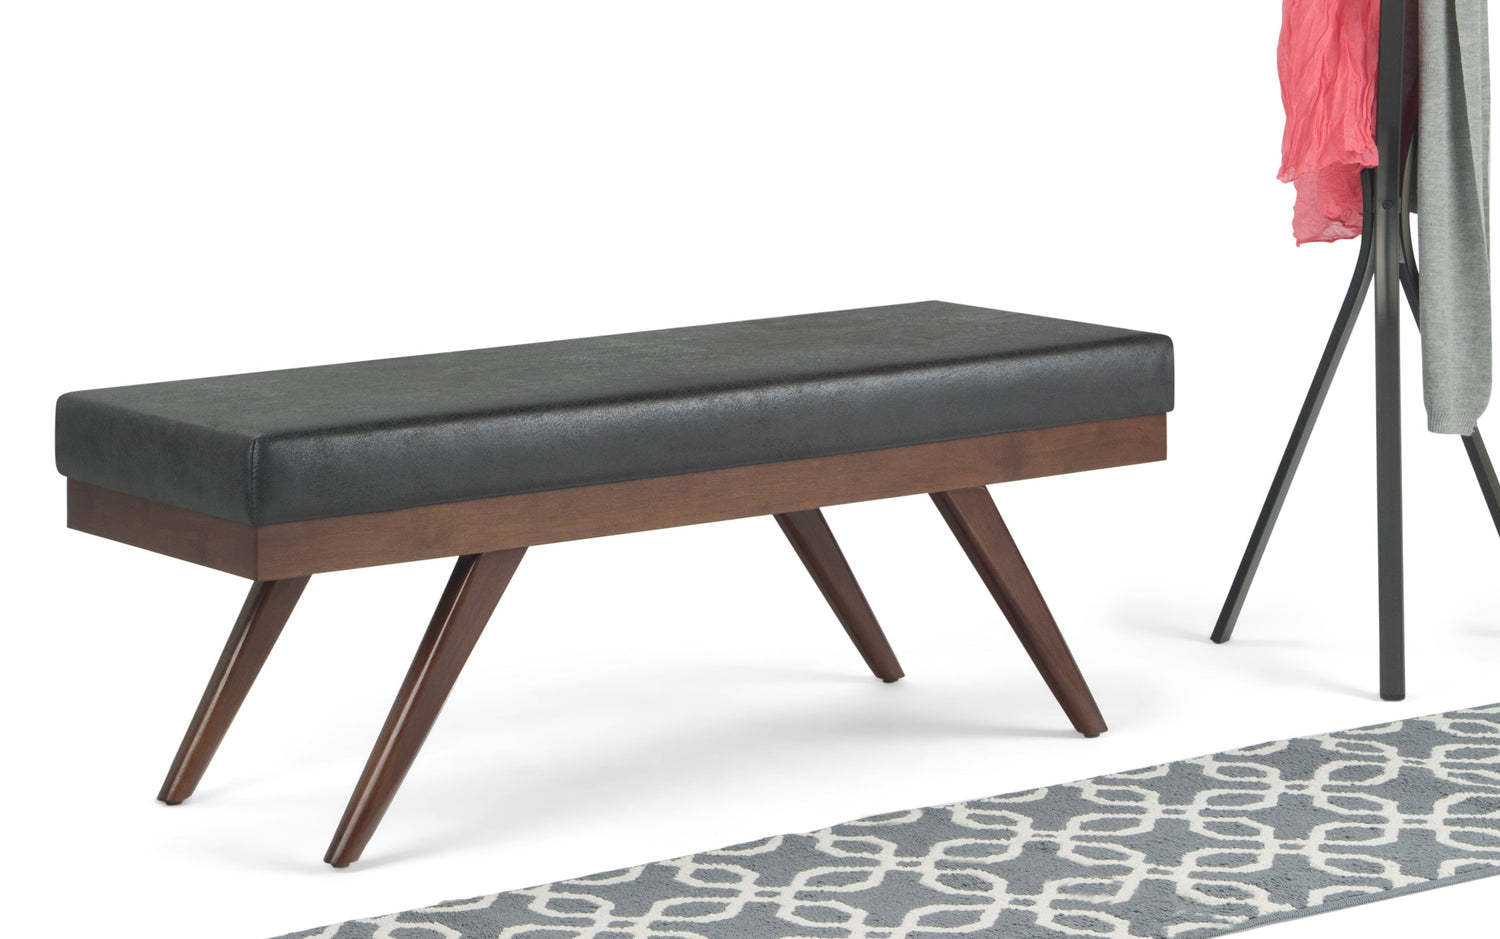 Distressed Black Distressed Vegan Leather| Chanelle Mid Century Ottoman Bench